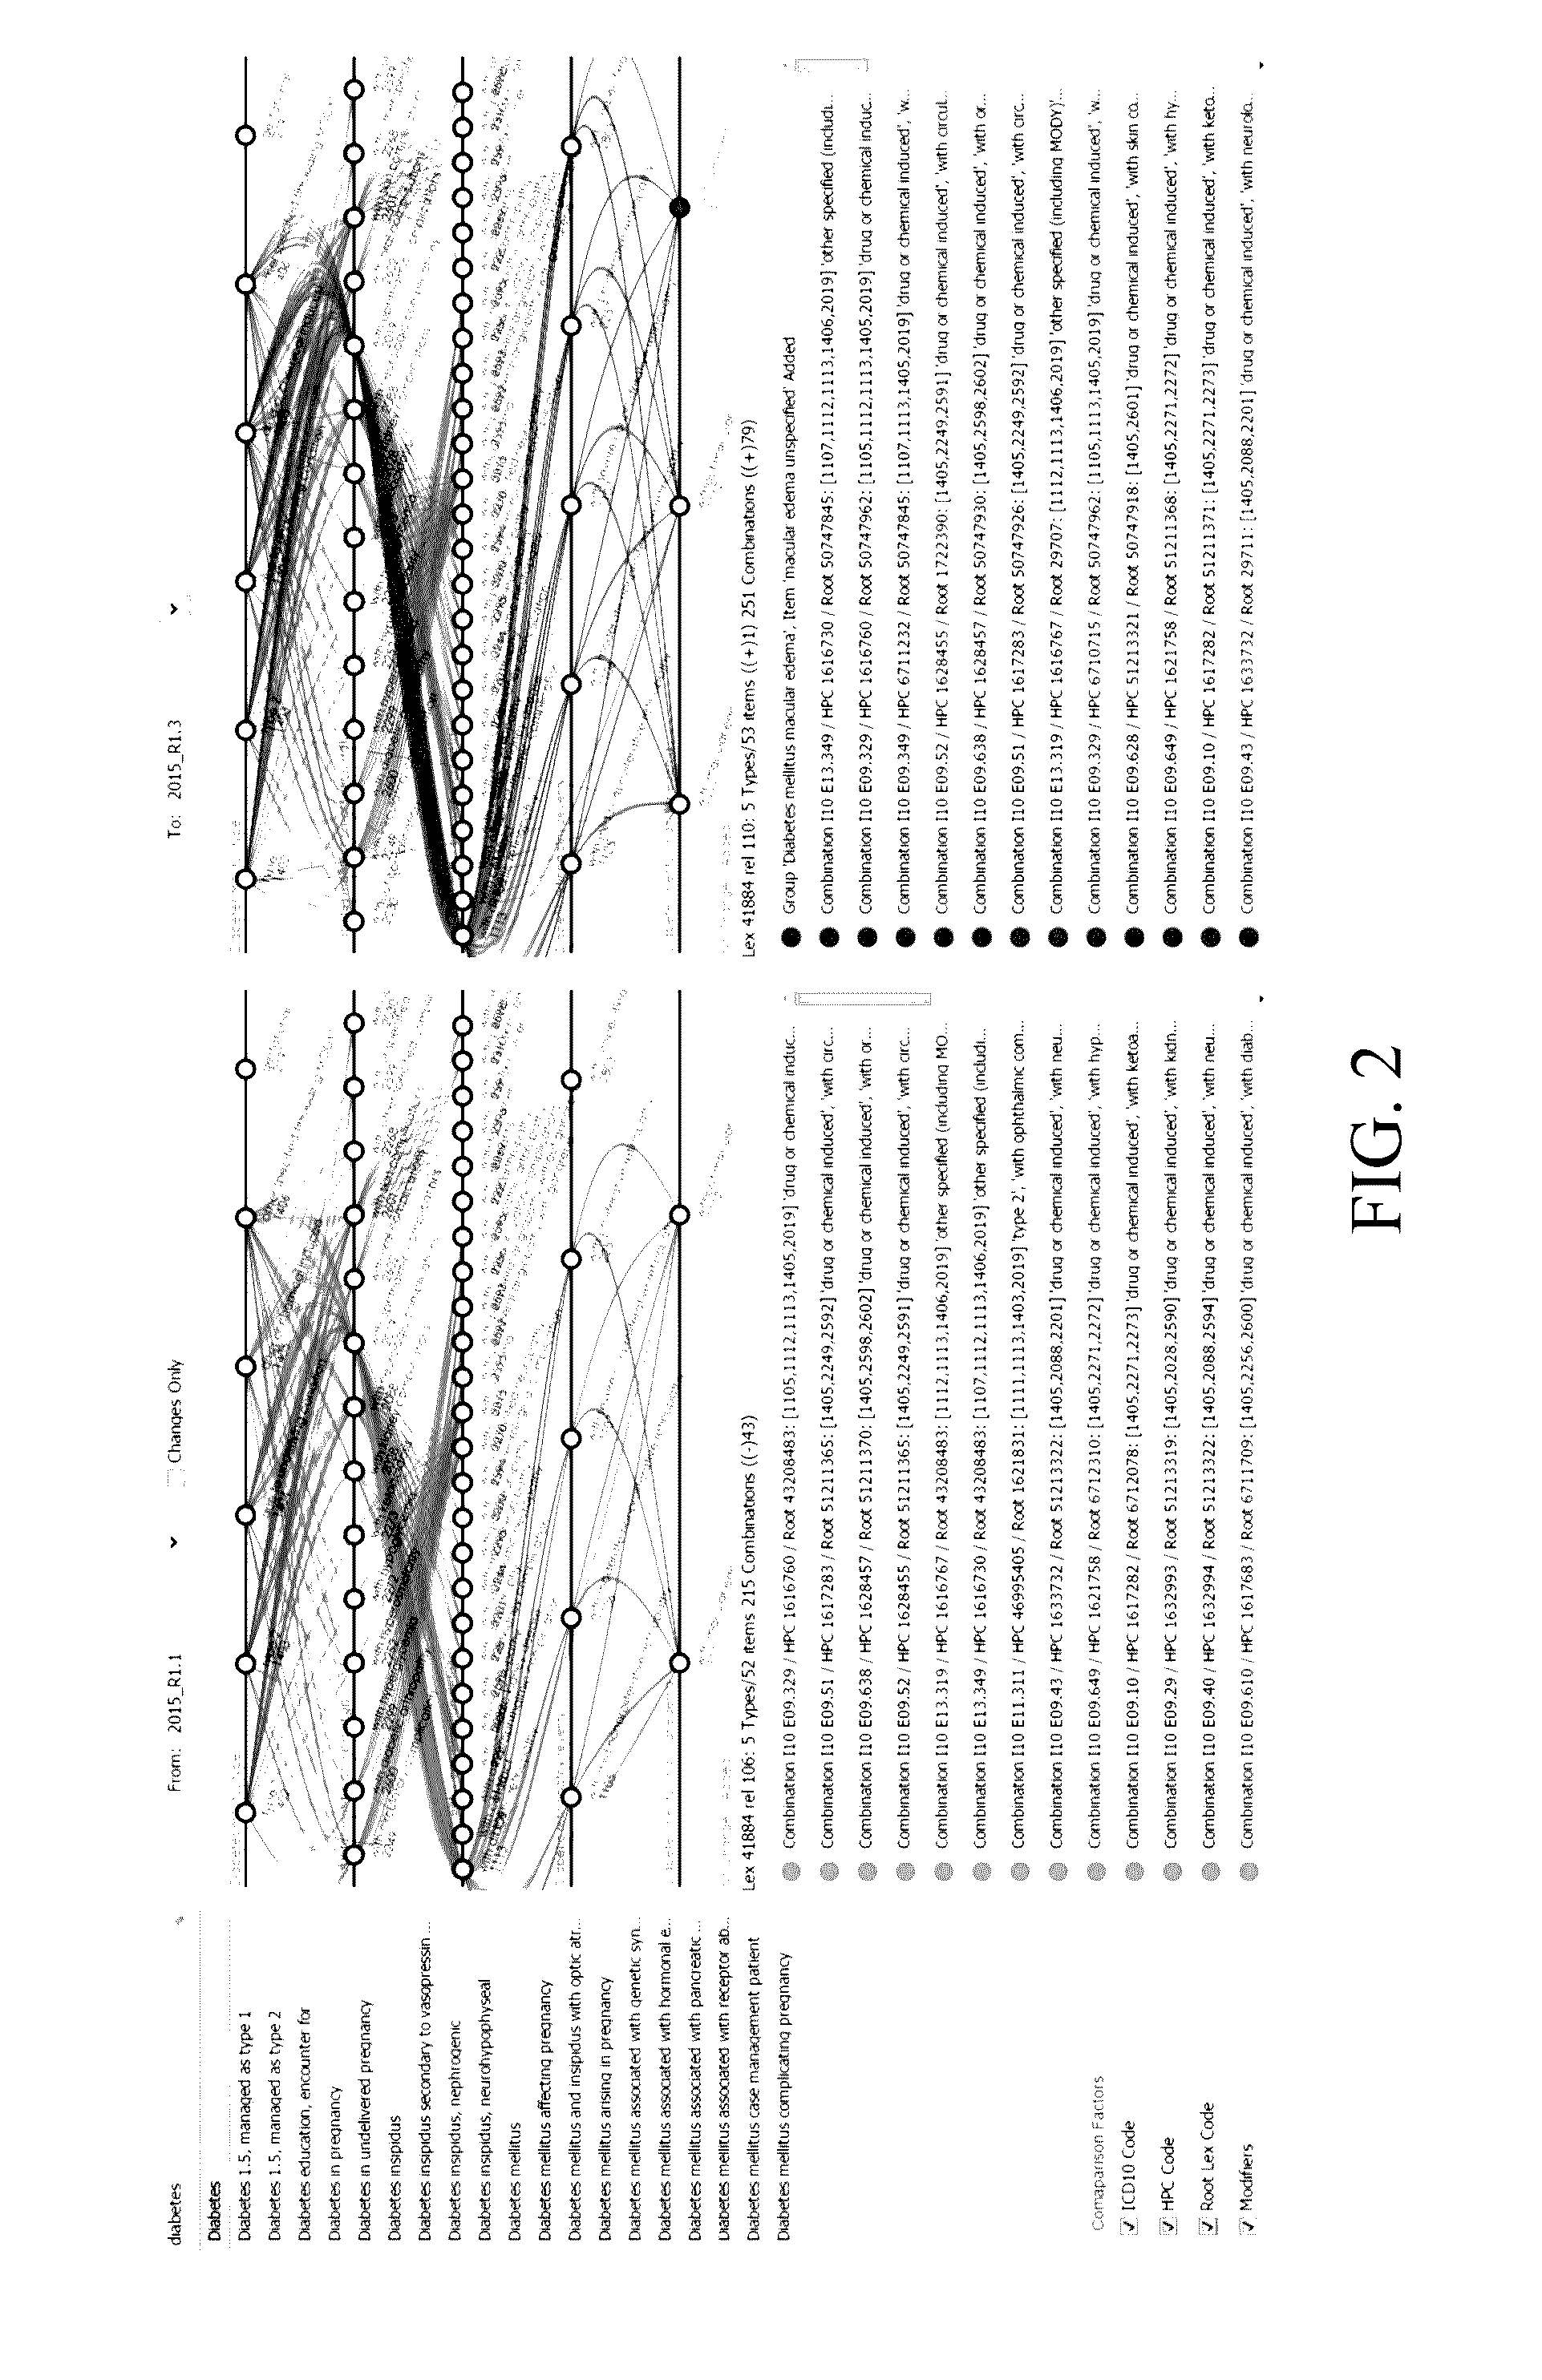 System and method for medical classification code modeling